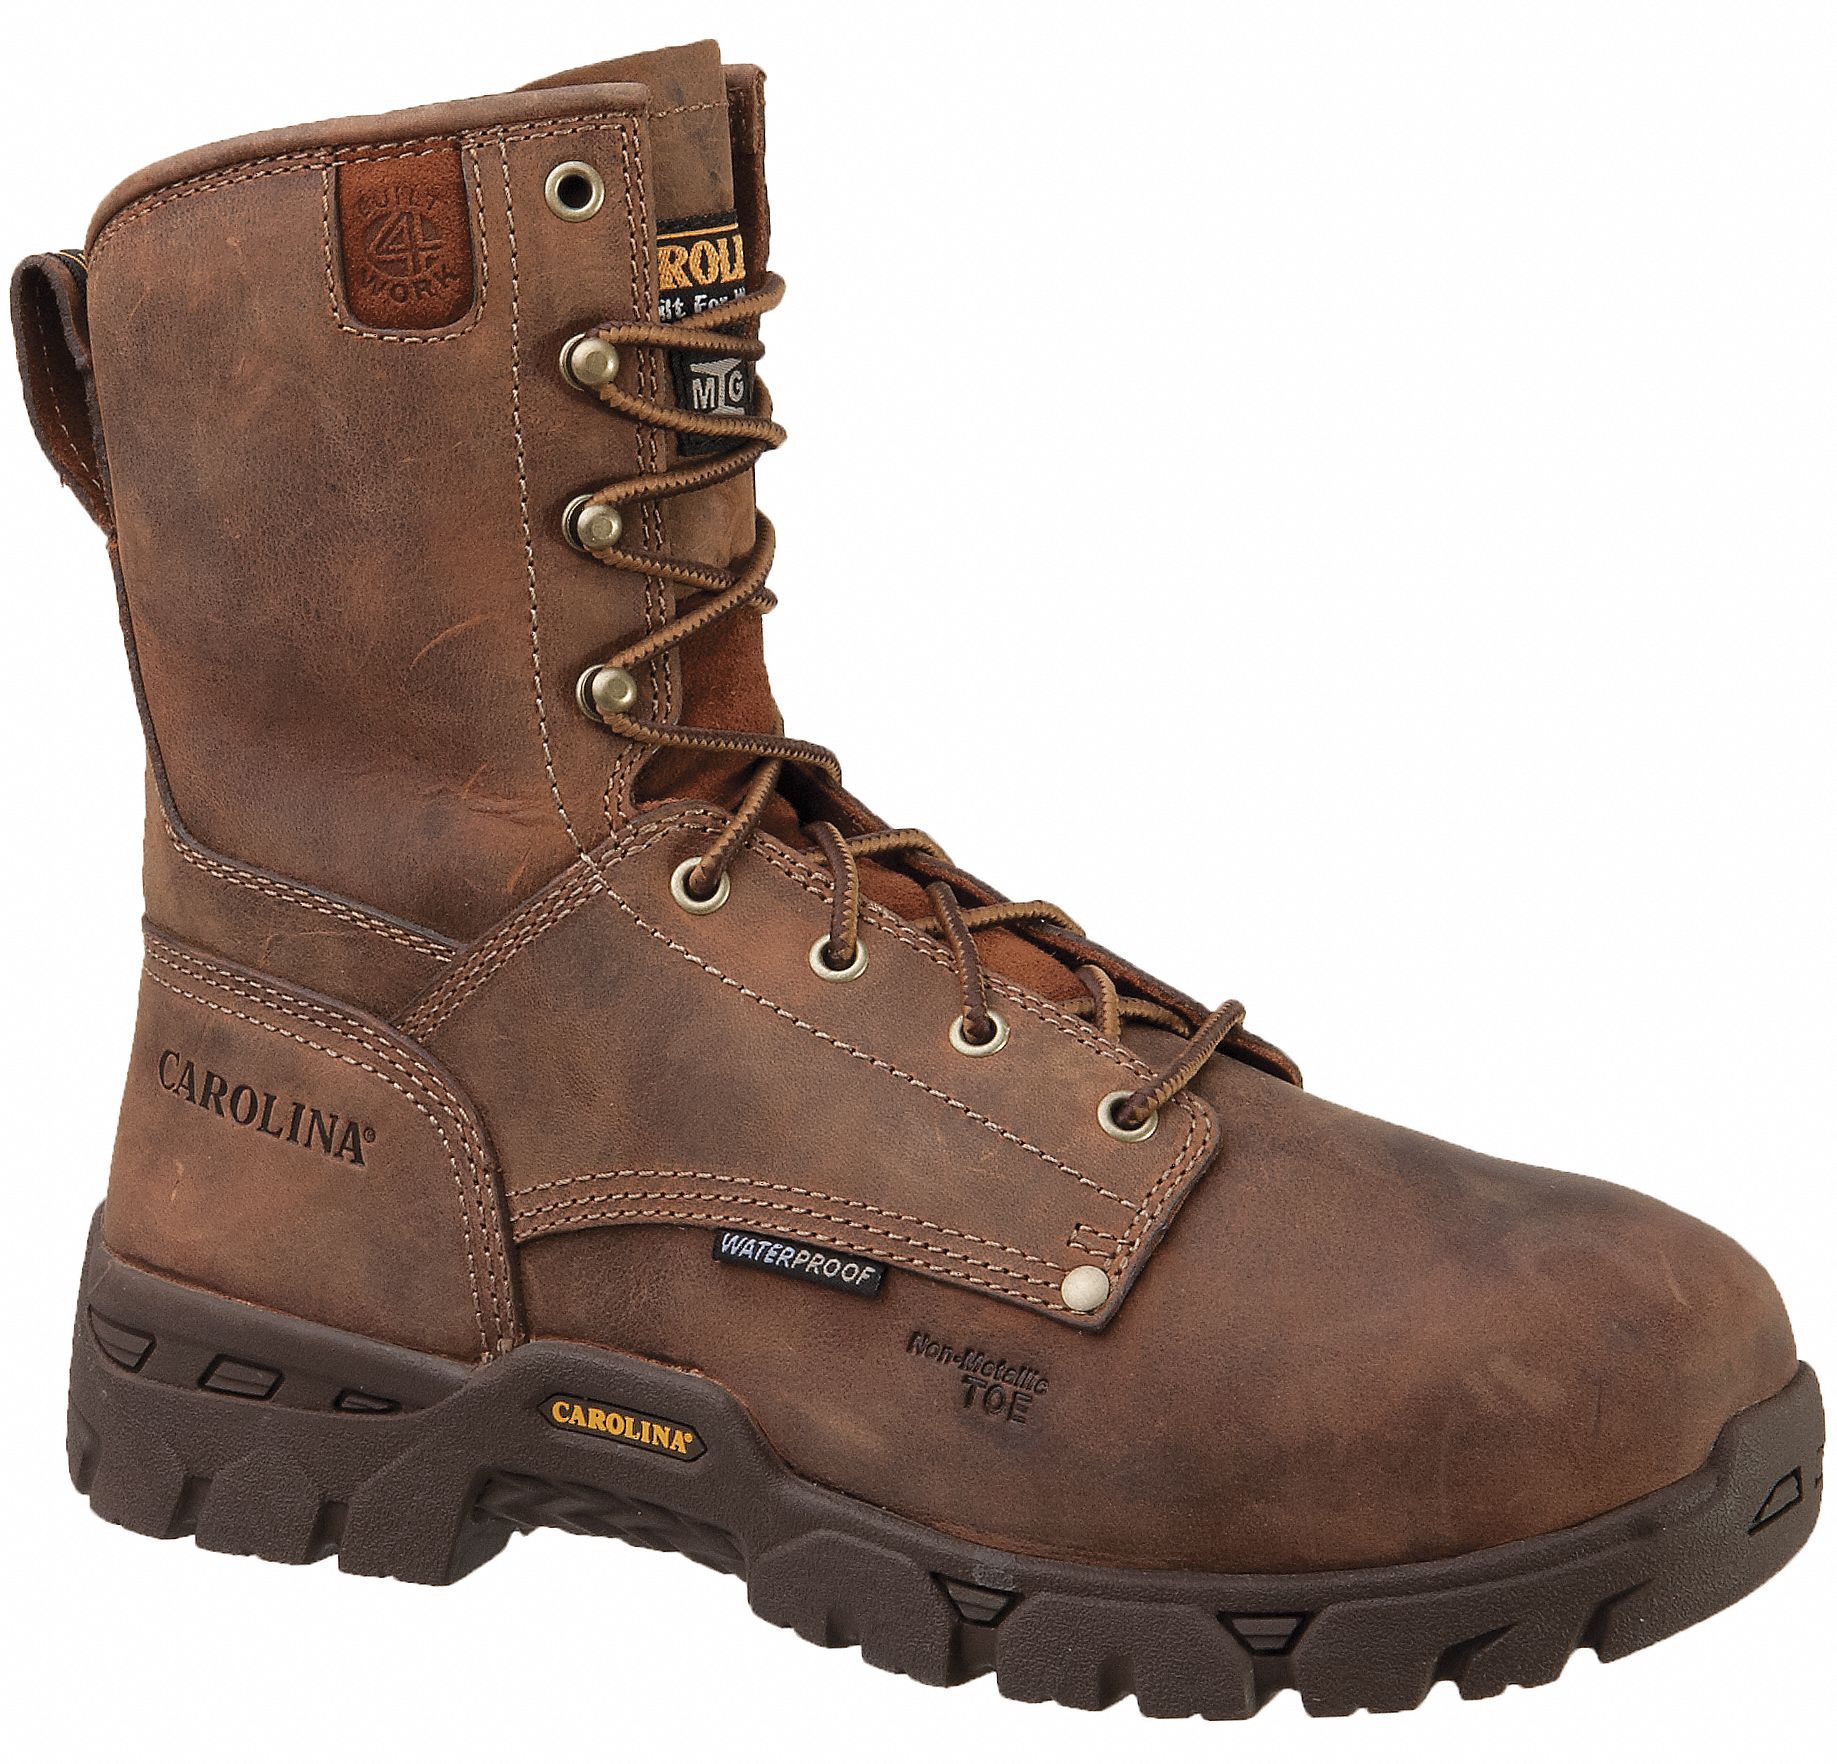 steel toe boots for small feet